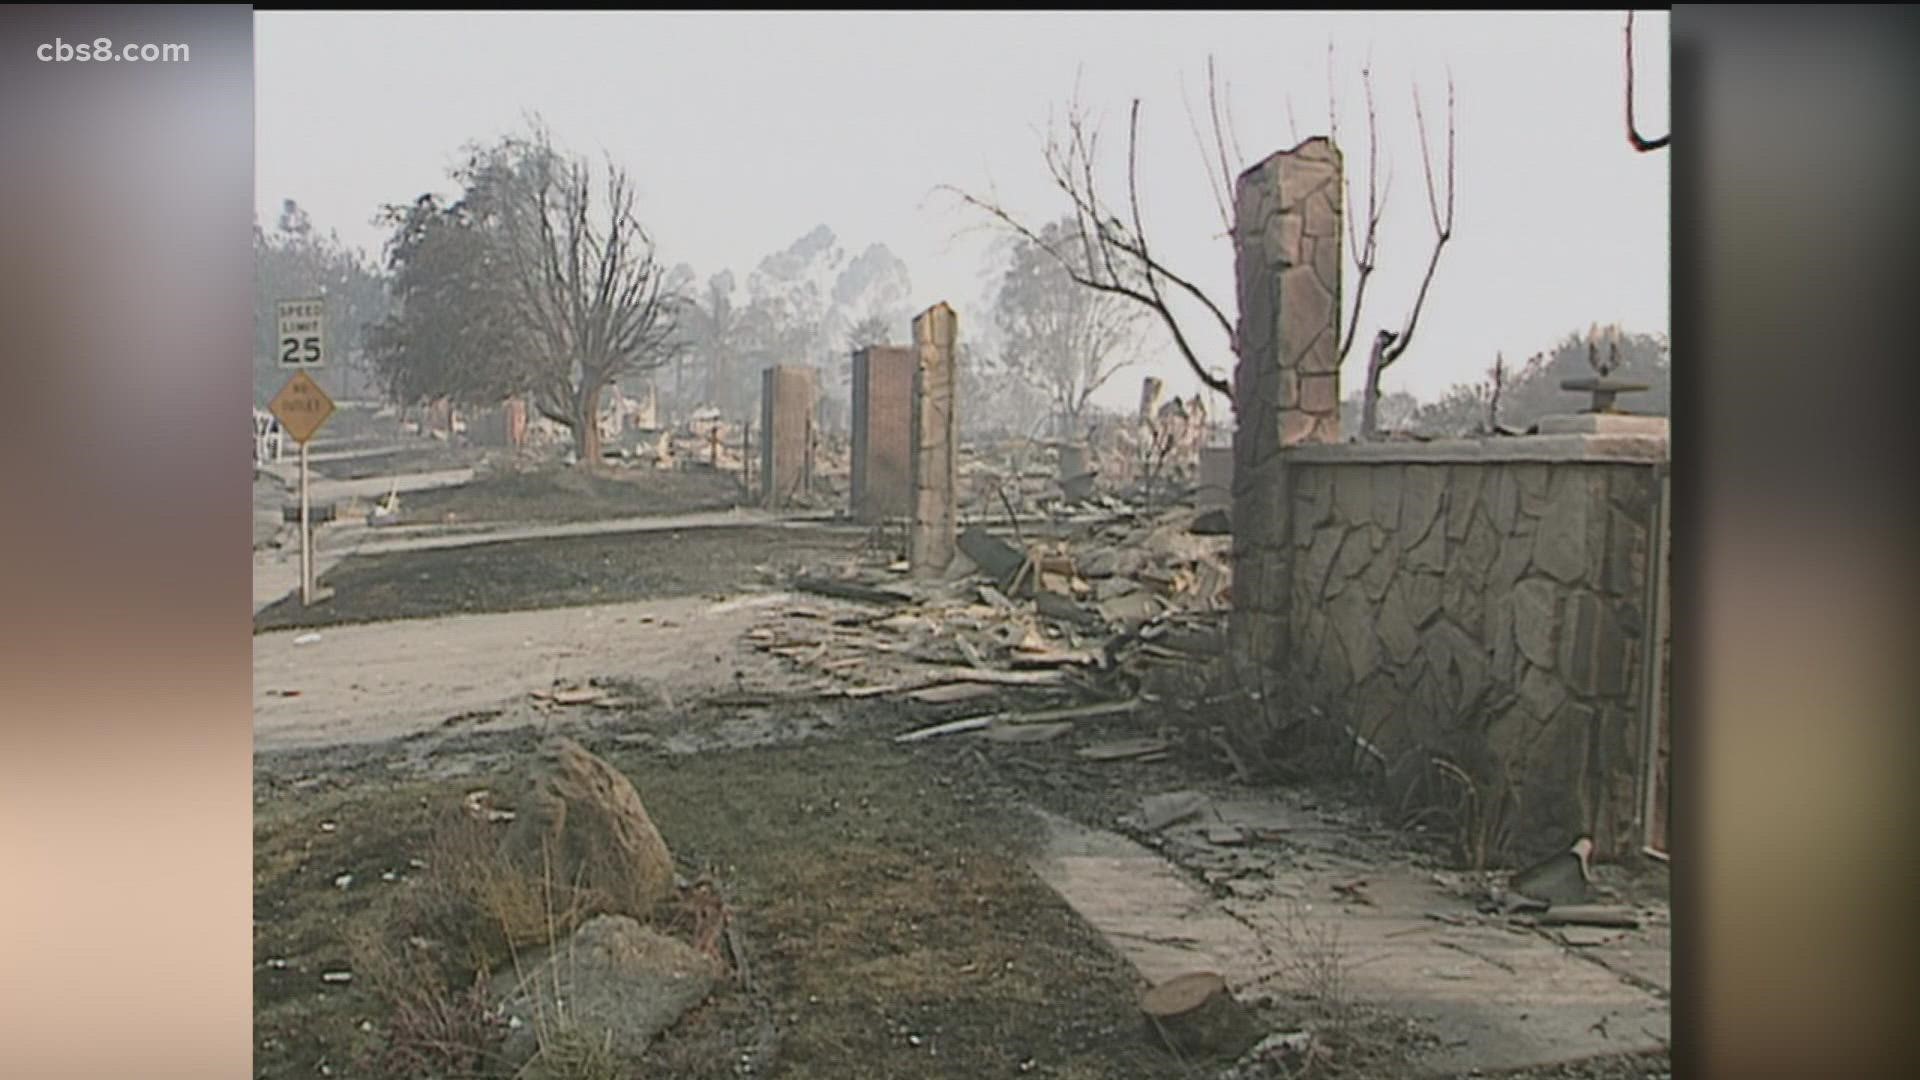 Karen Reimus and her family lost their home and everything in it in the 2003 Cedar Fire that destroyed more than 2,200 homes in San Diego County.